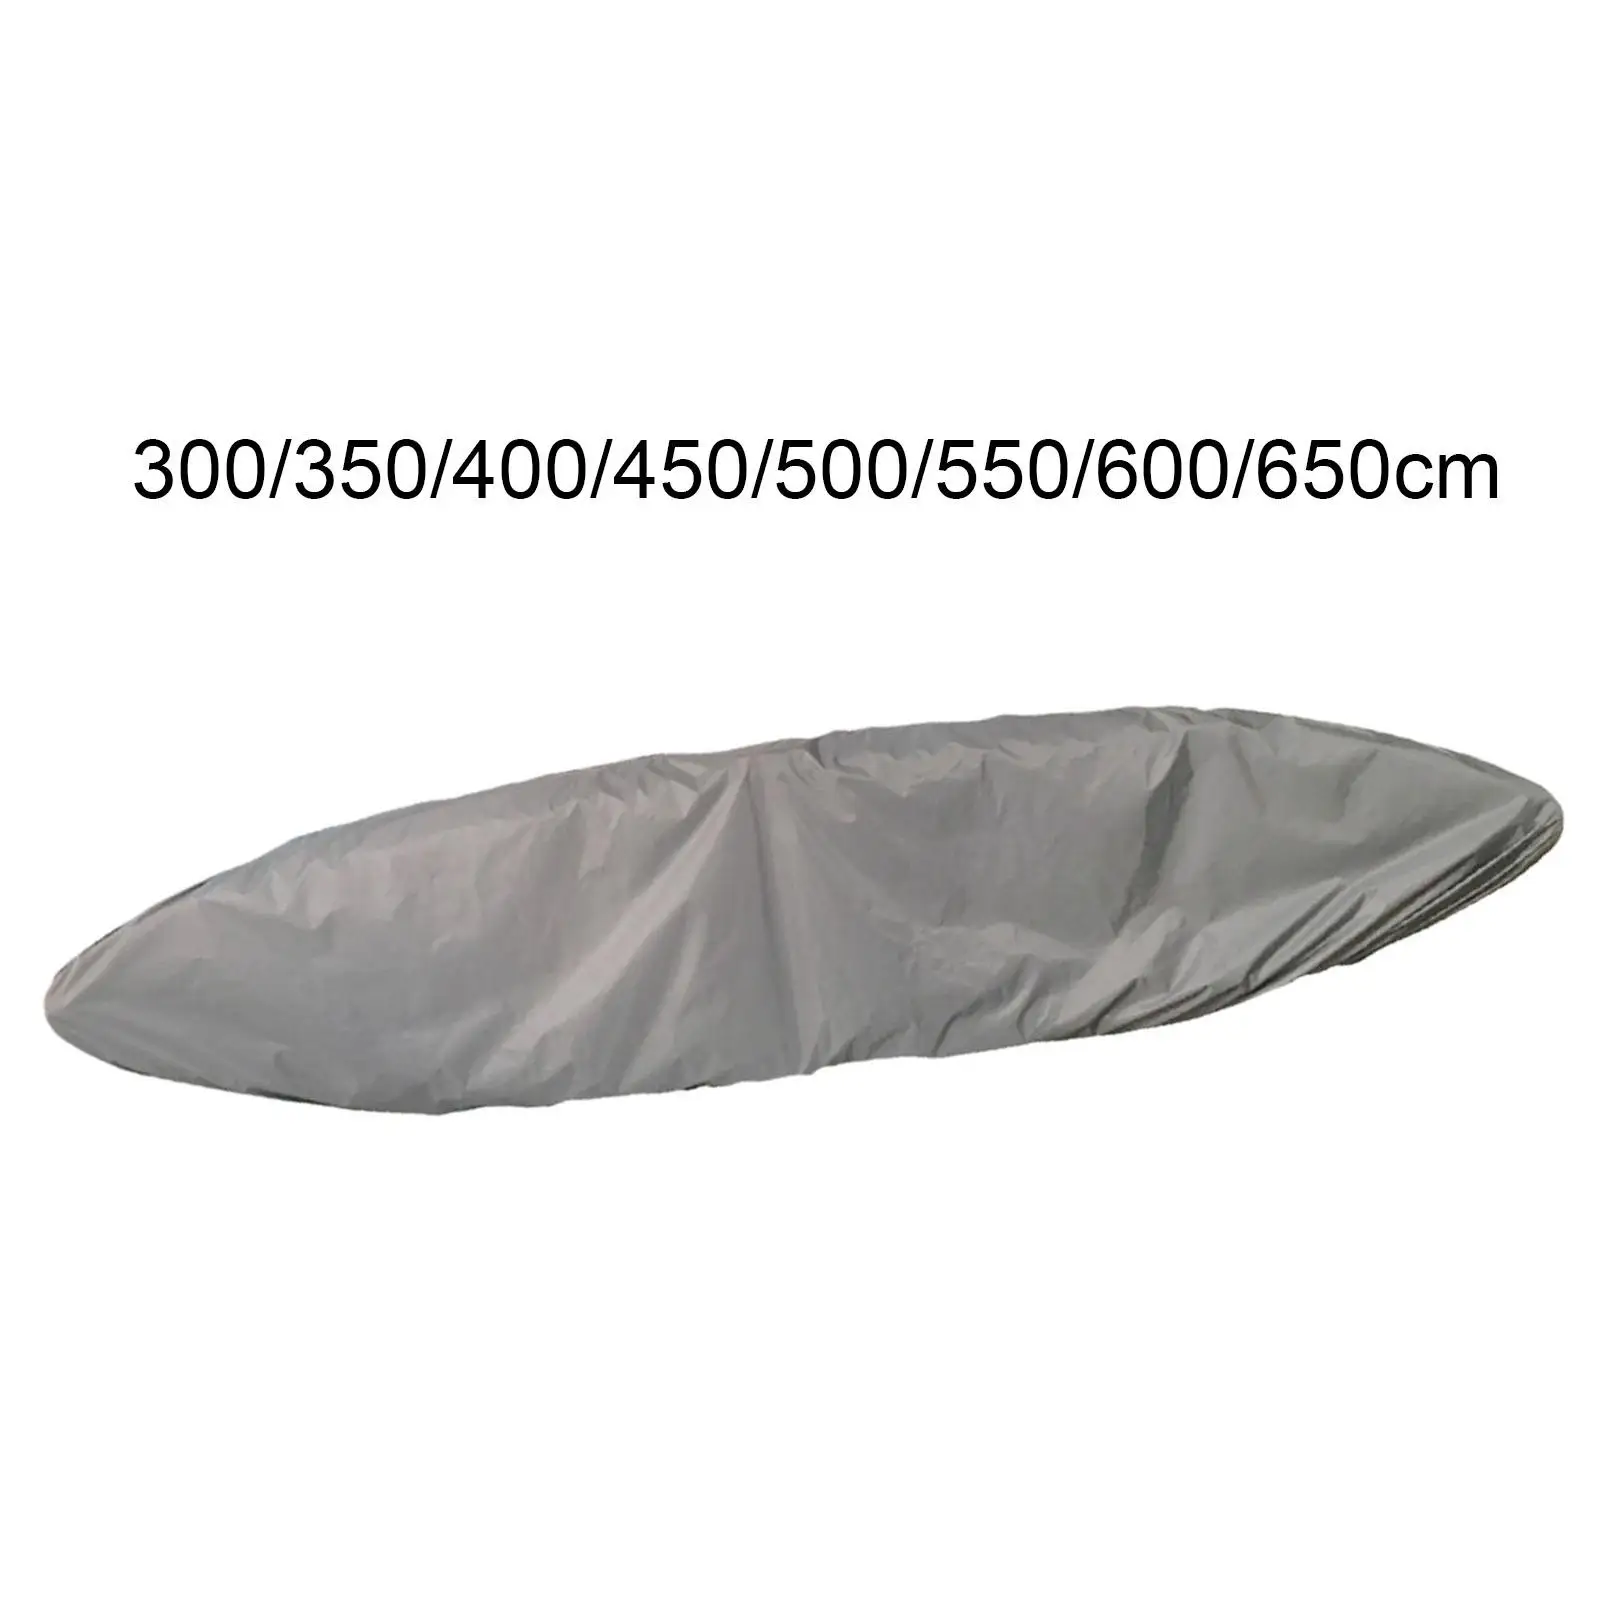 Canoe Cover Kayak Canoe Cover Oxford Cloth Sunblock Shield Waterproof Kayak Cover Boat Dust Cover for Canoeing Kayaking Surfing